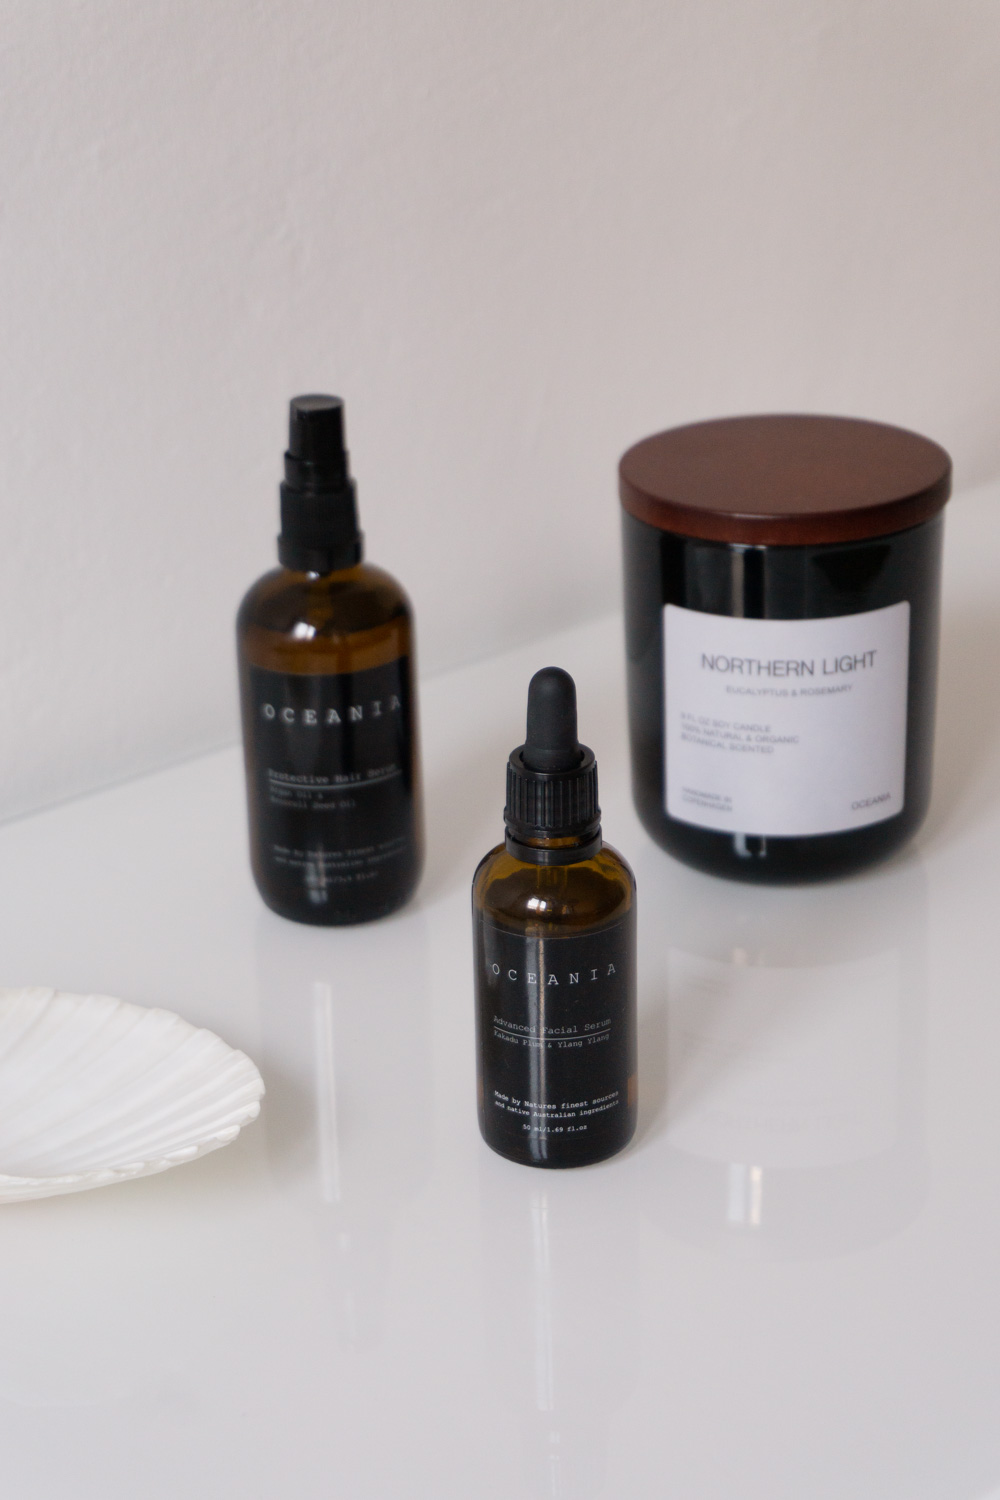 Oceania Skincare | Natural Minimalist Oil Skin Care, Made in Copenhagen | Beauty Product Photography | Slow Living, Self Care | RG Daily Blog